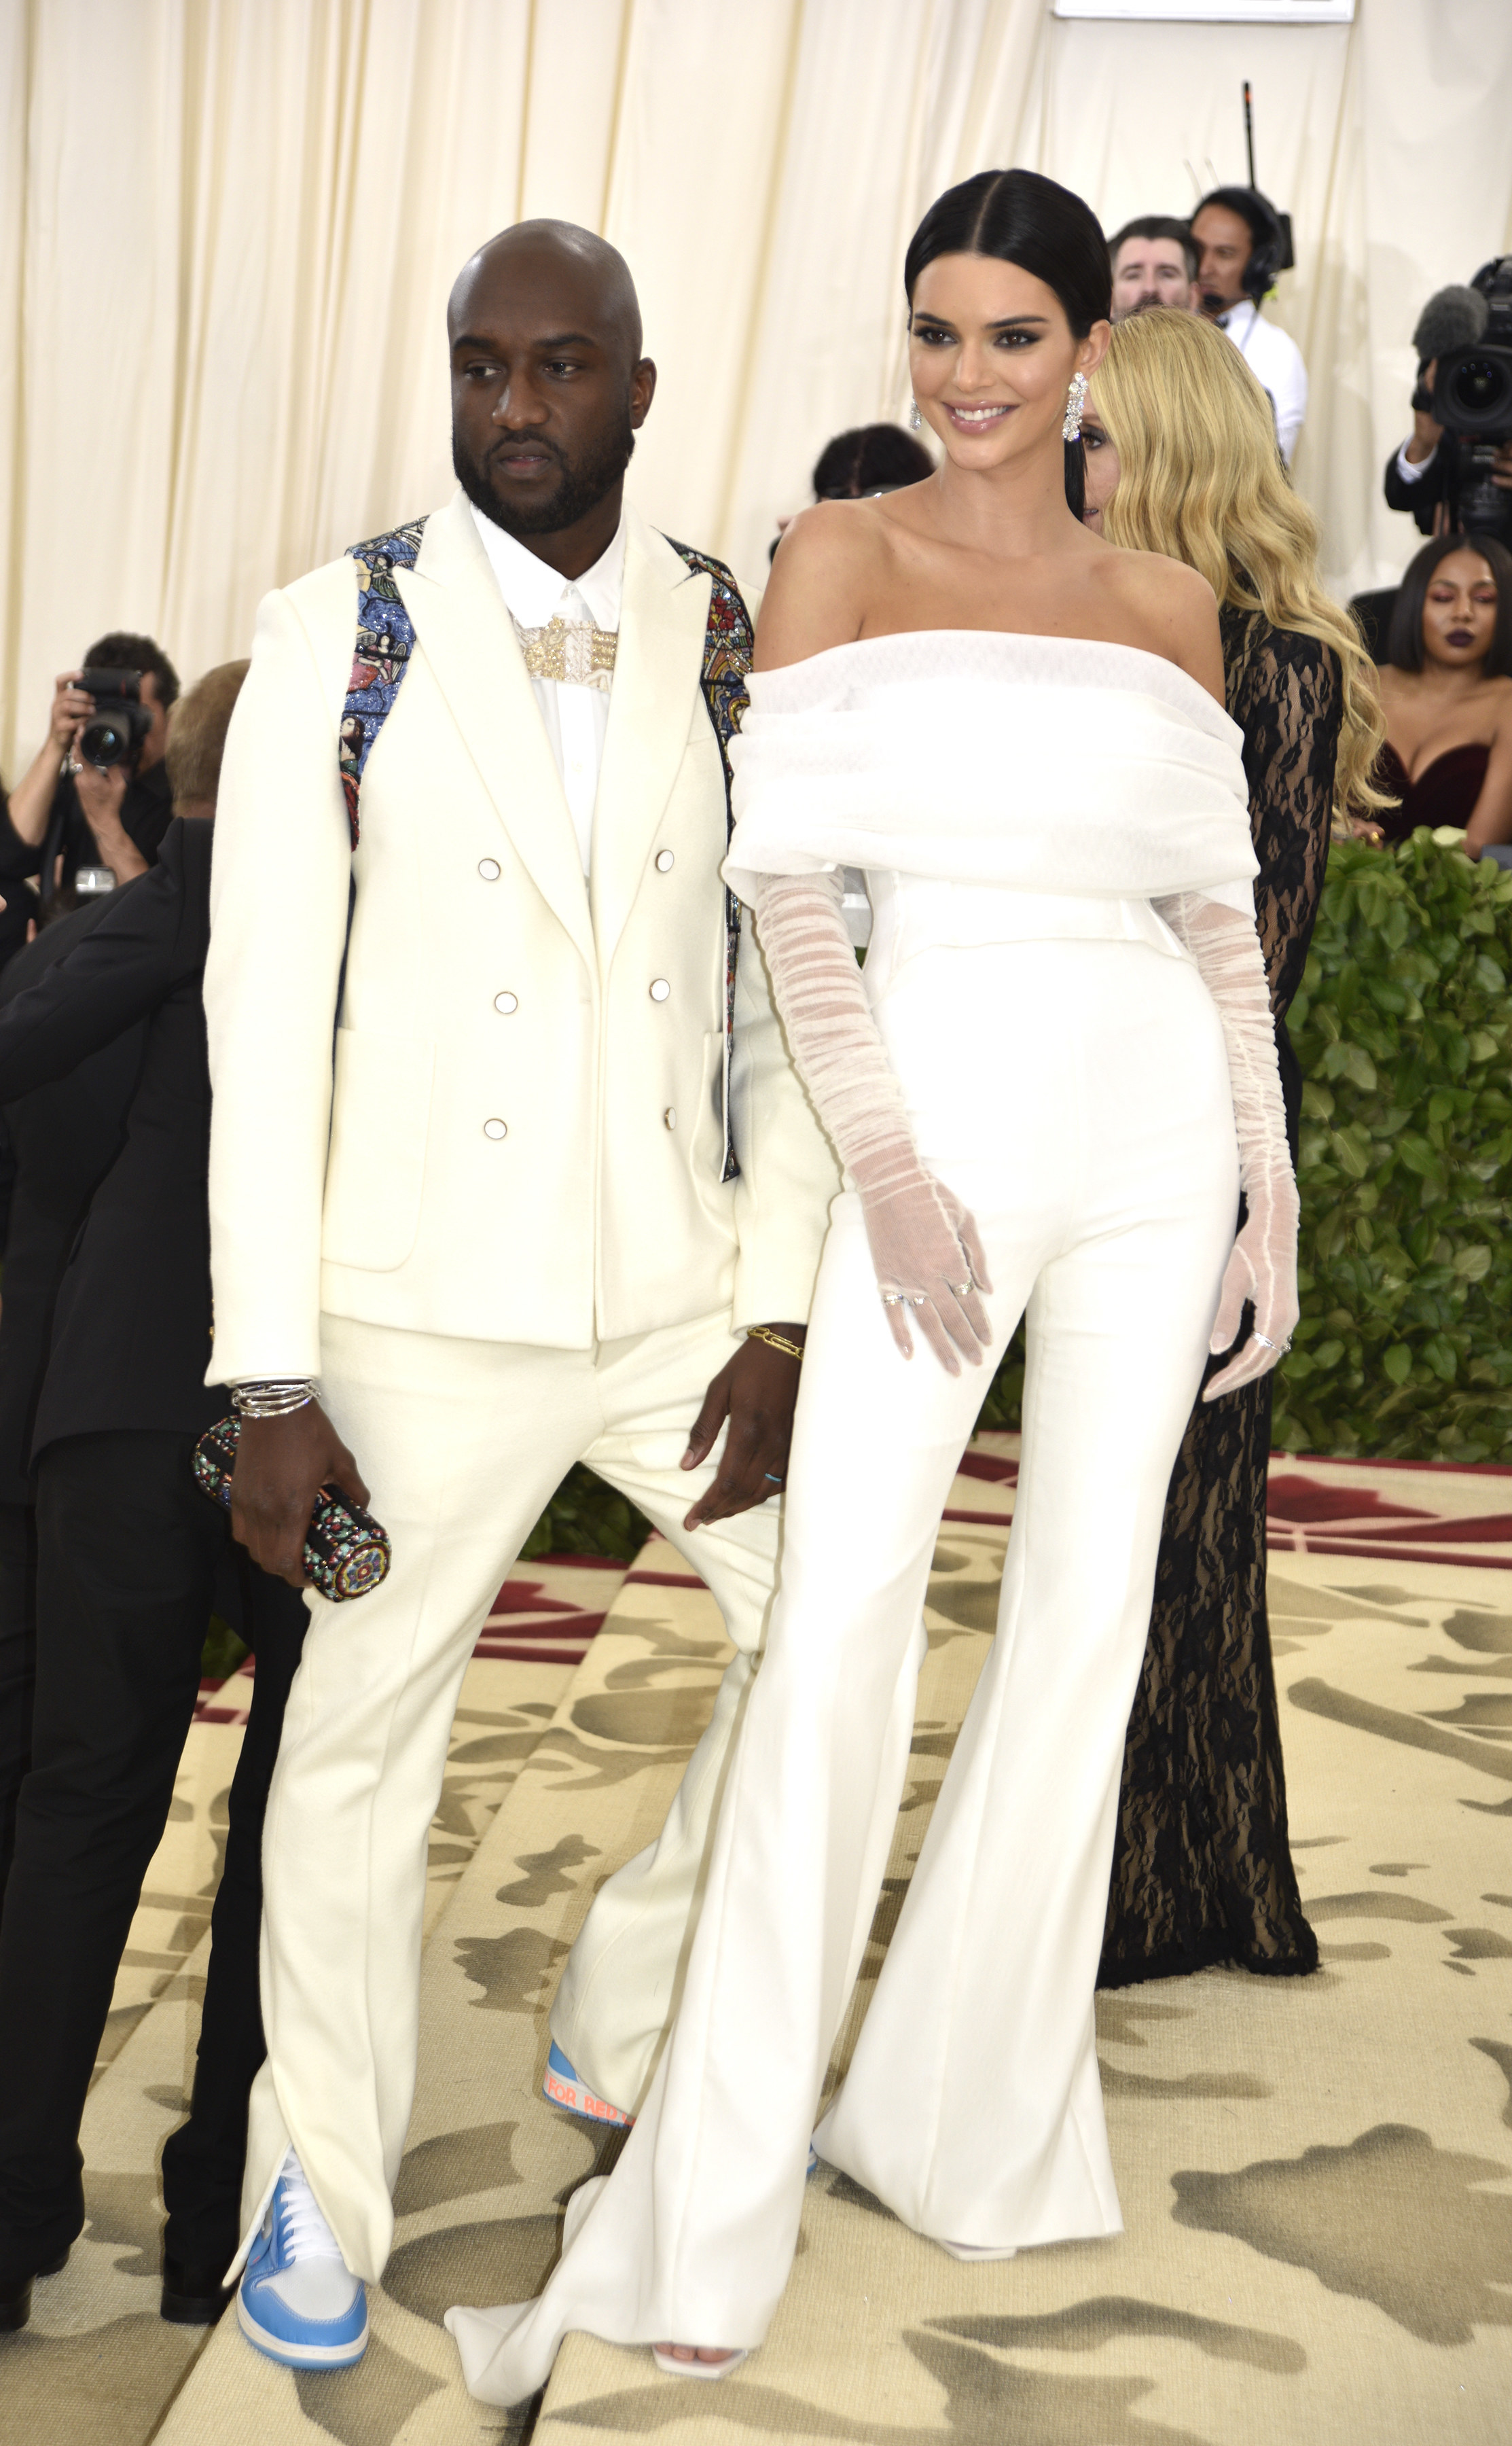 Virgil Abloh and Kendall Jenner attend the Met Gala on May 7, 2018